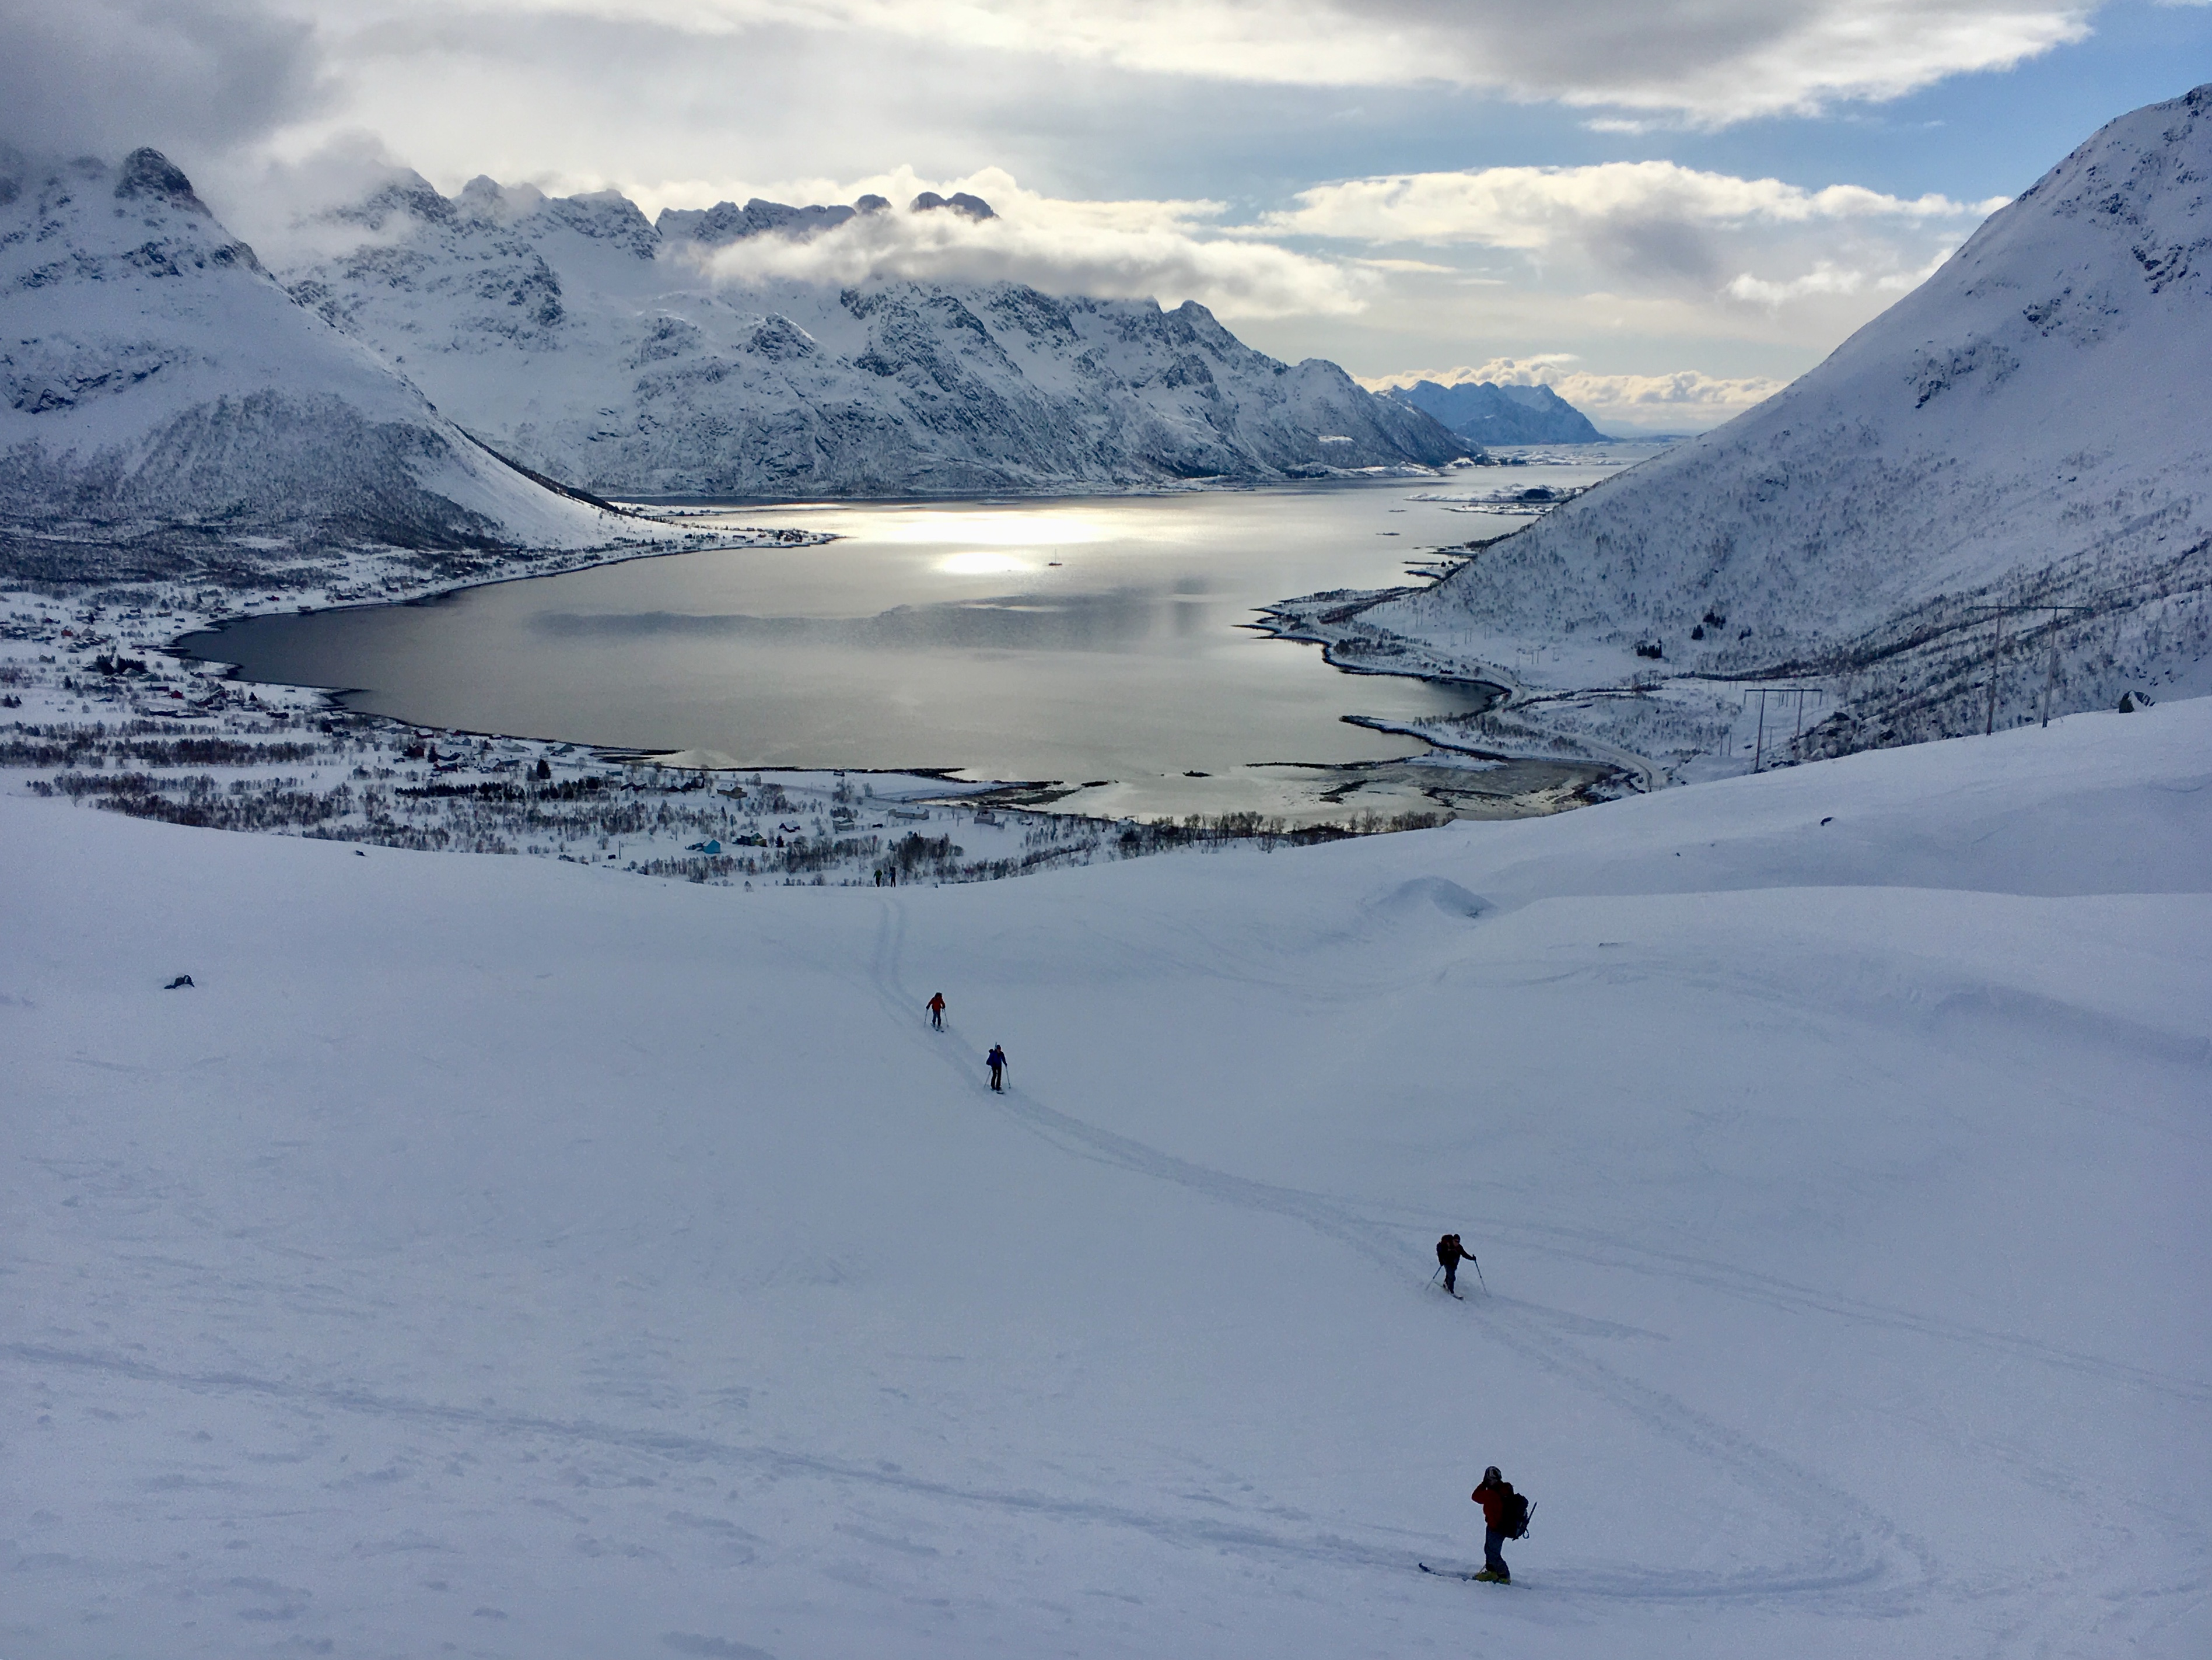 Skiiers ski touring in Lofonten, with the fjord in the background